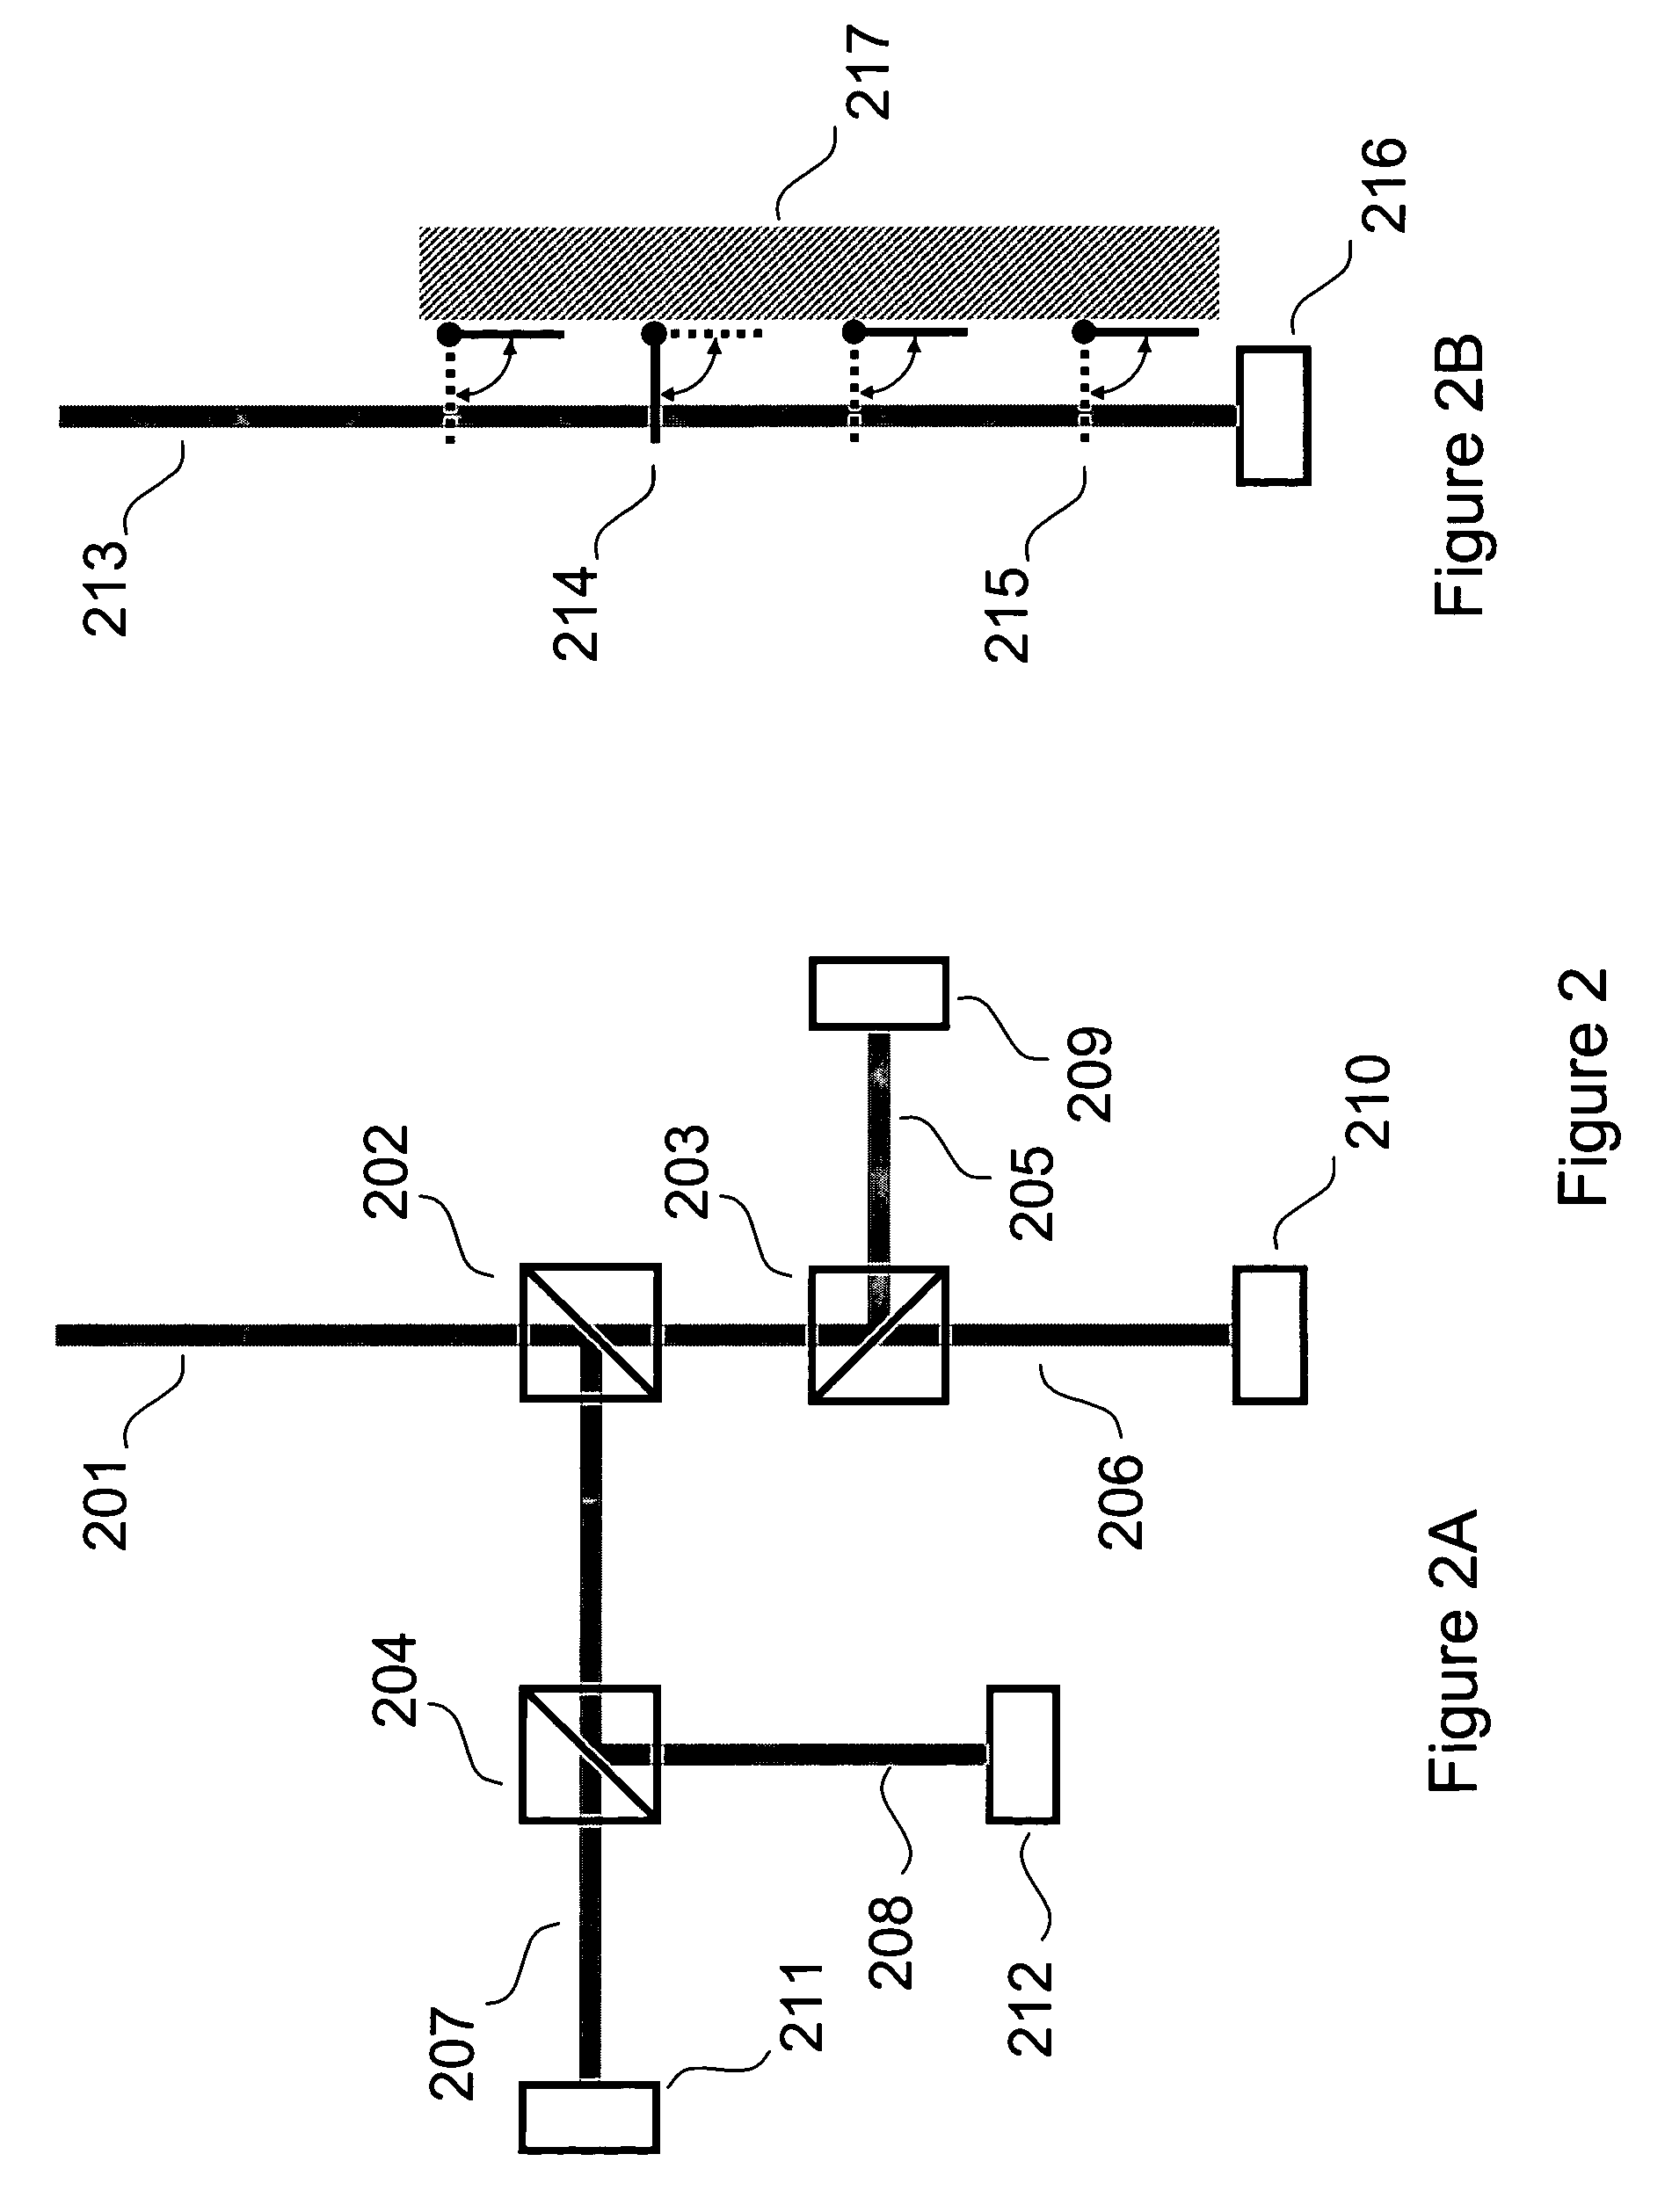 Multiple reference non-invasive analysis system